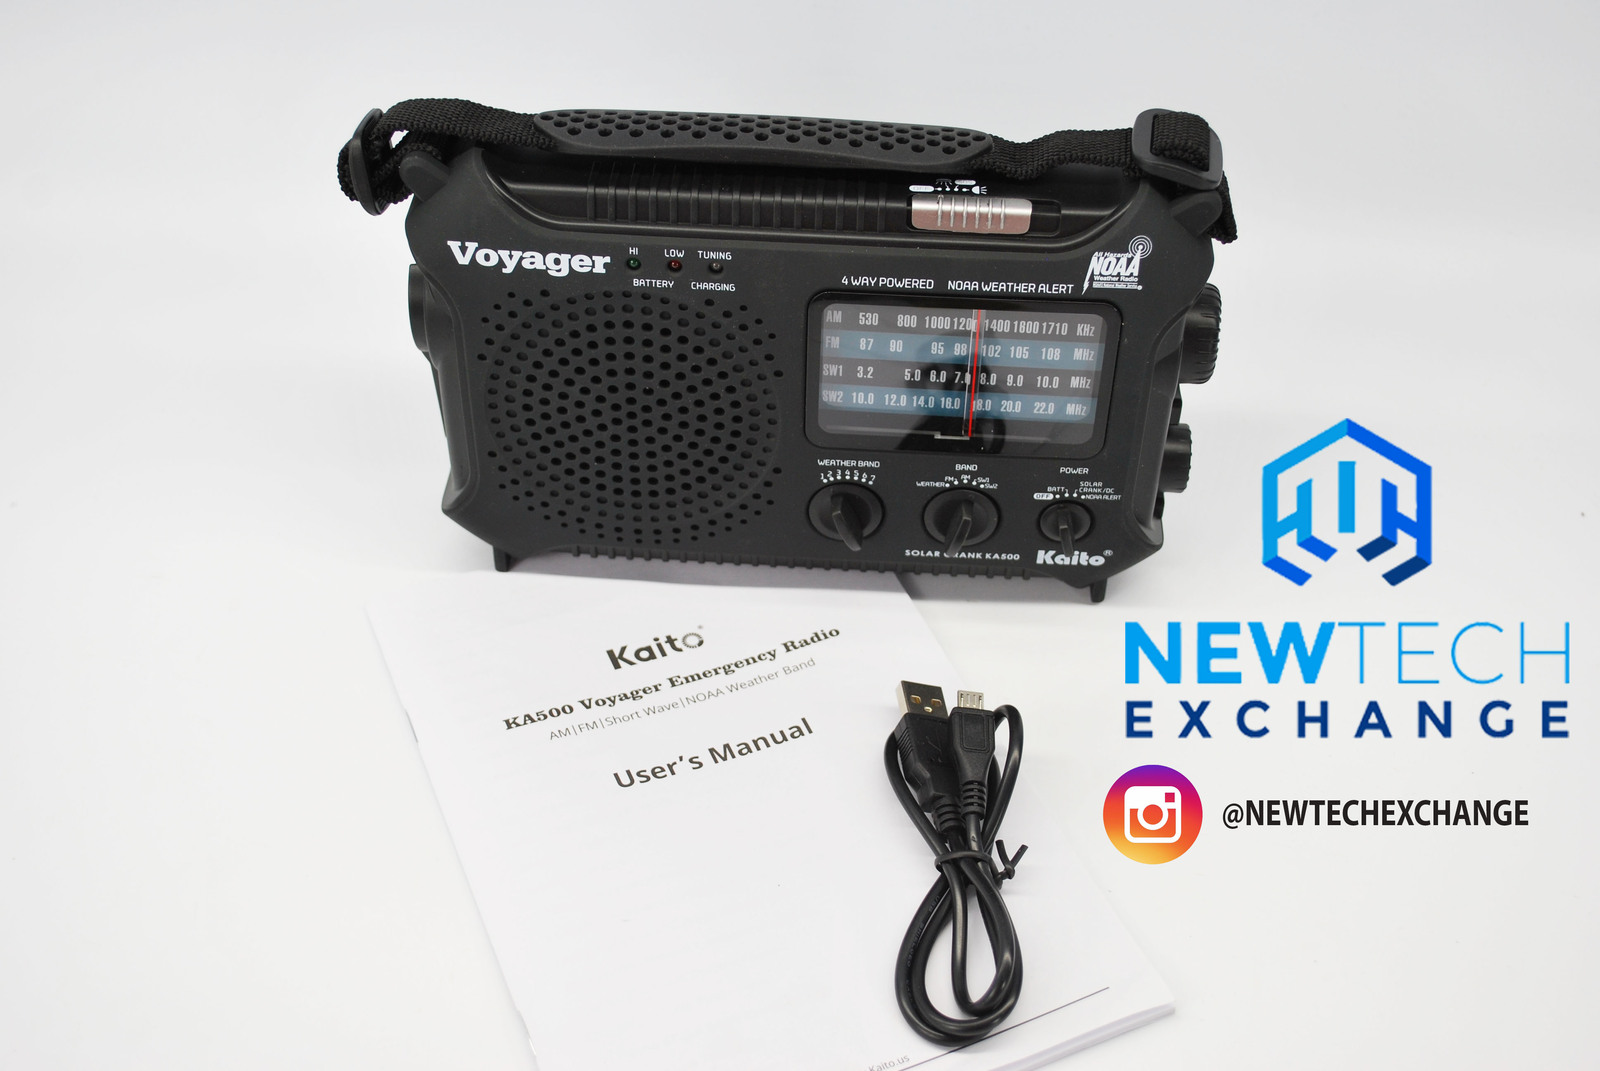 innovage outdoor rechargeable radio manual